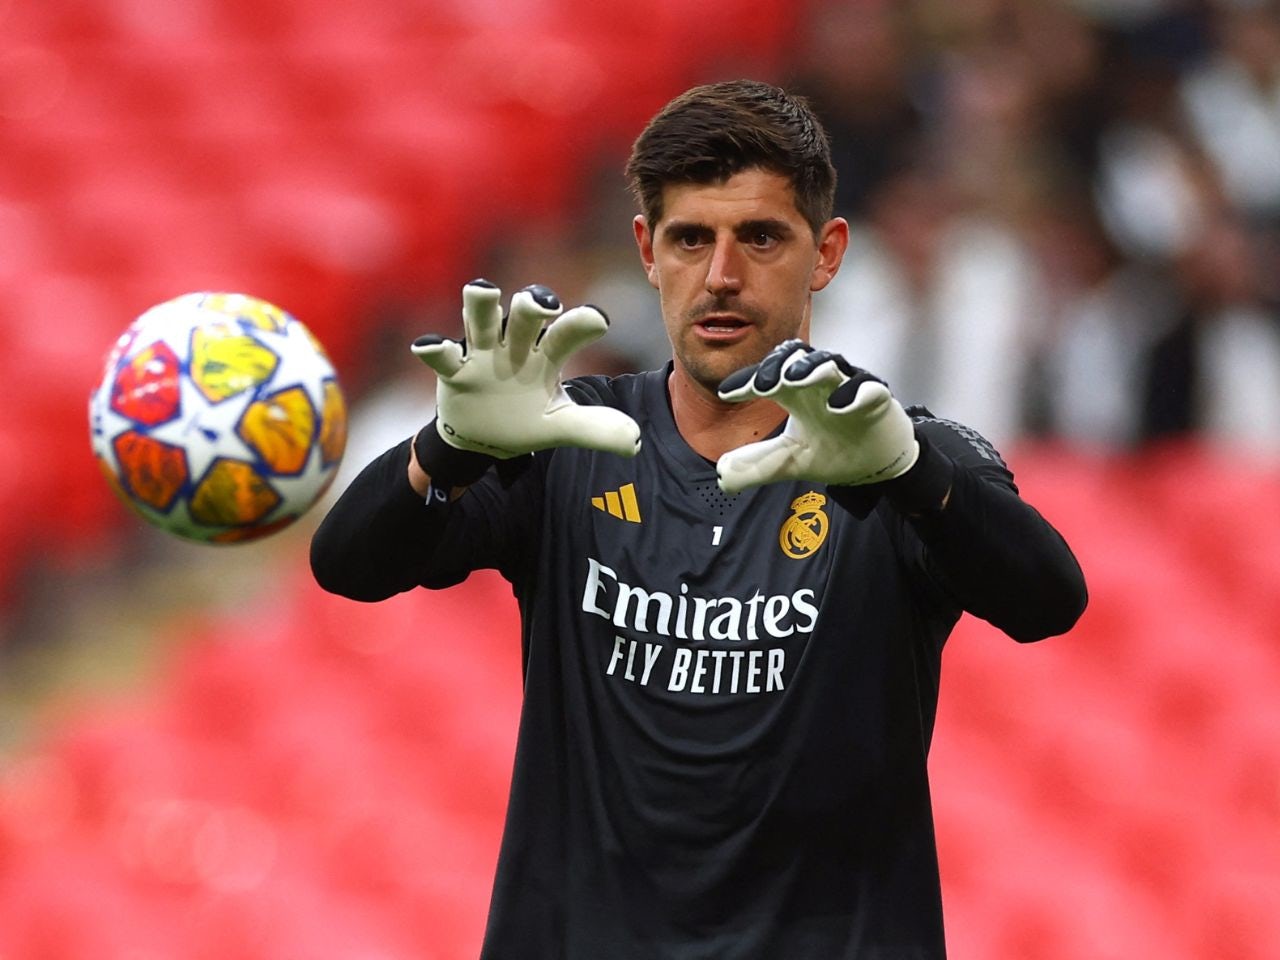 Real Madrid goalkeeper Courtois offers Endrick advice after El Clasico defeat